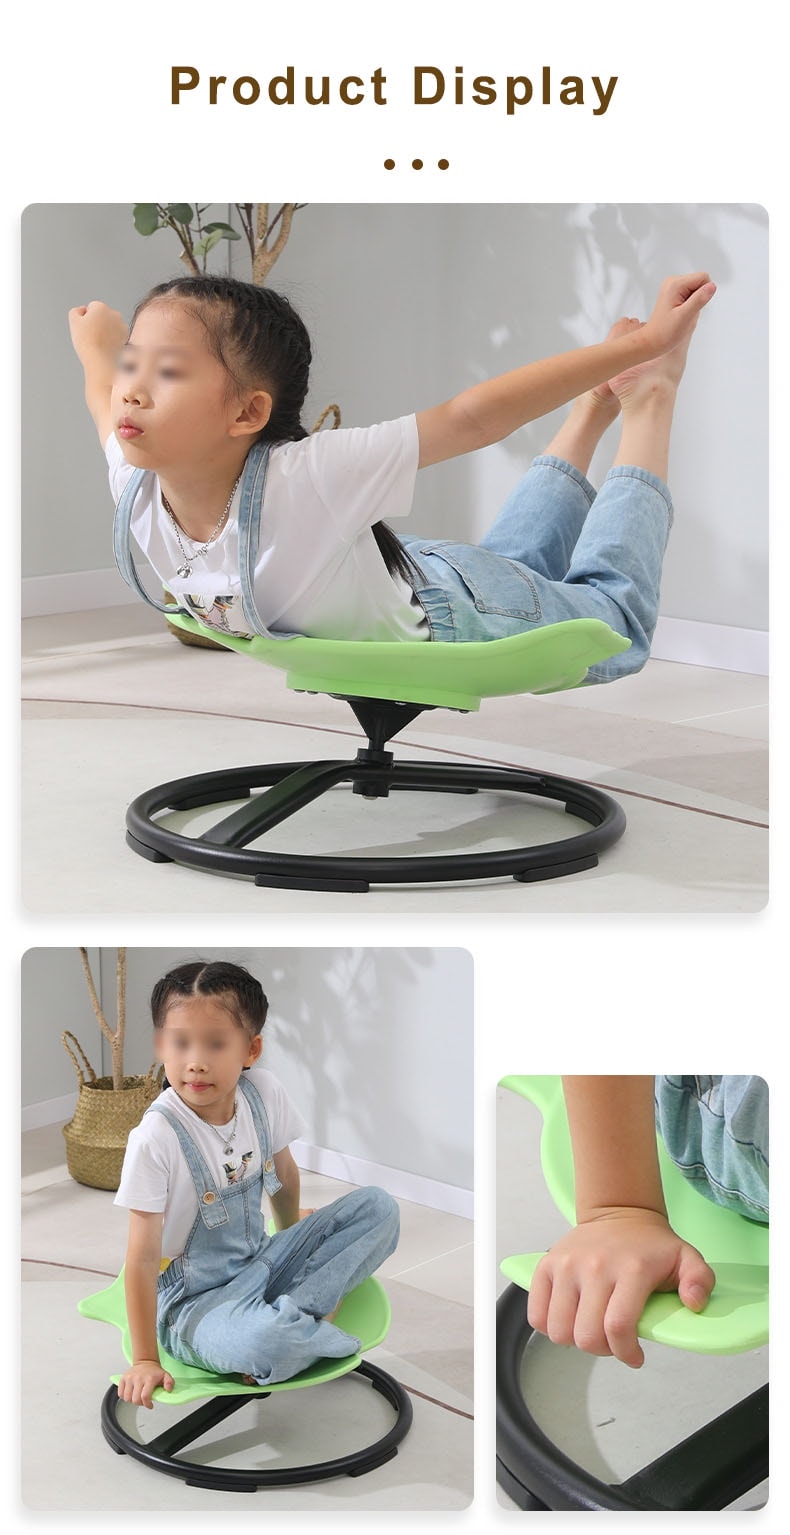 2024 High Quality Safe Stable Smooth Edges Fish Shaped Balance Spinning Chair Swivel Chair Sensory Toys for Autistic Kids